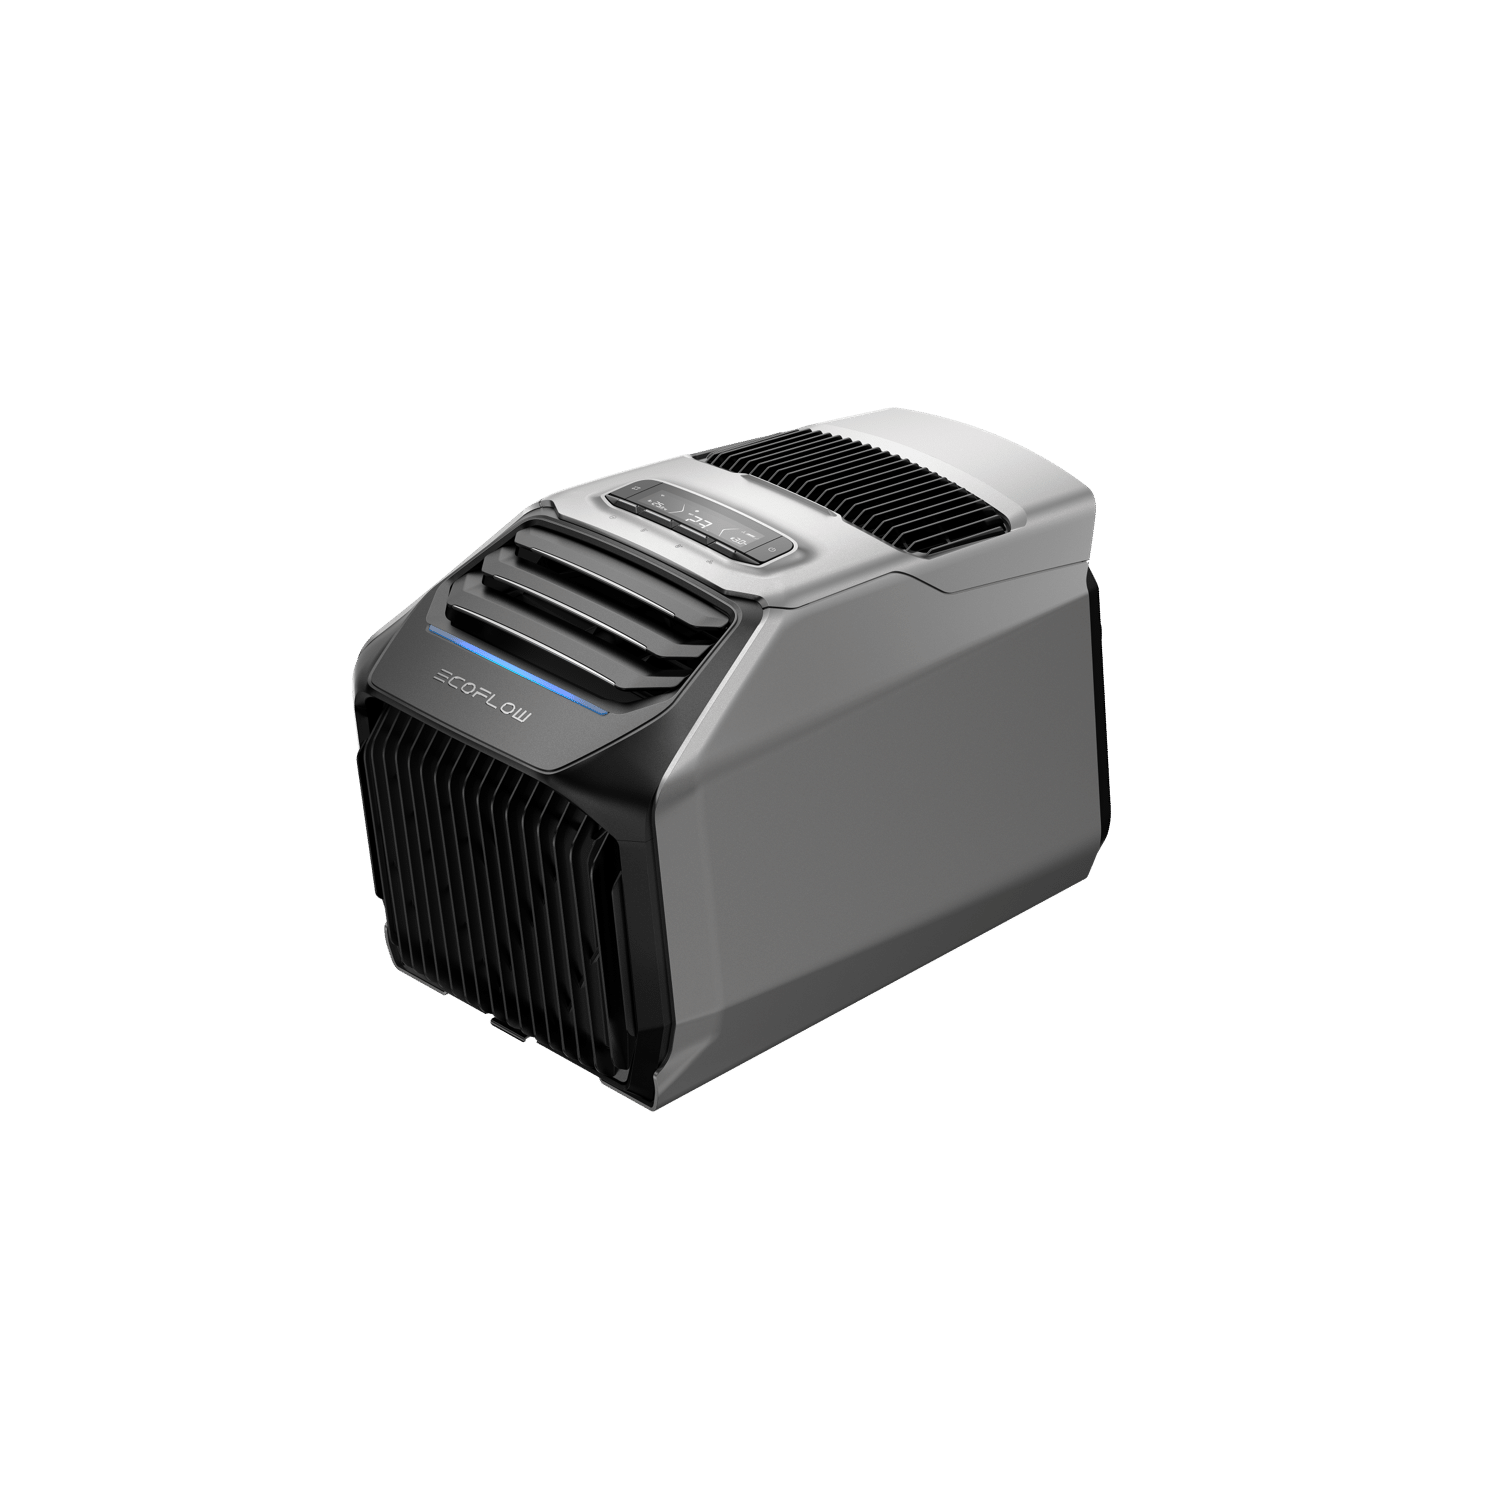 Ecoflow WAVE 2 Portable Air Conditioner with Heater $939